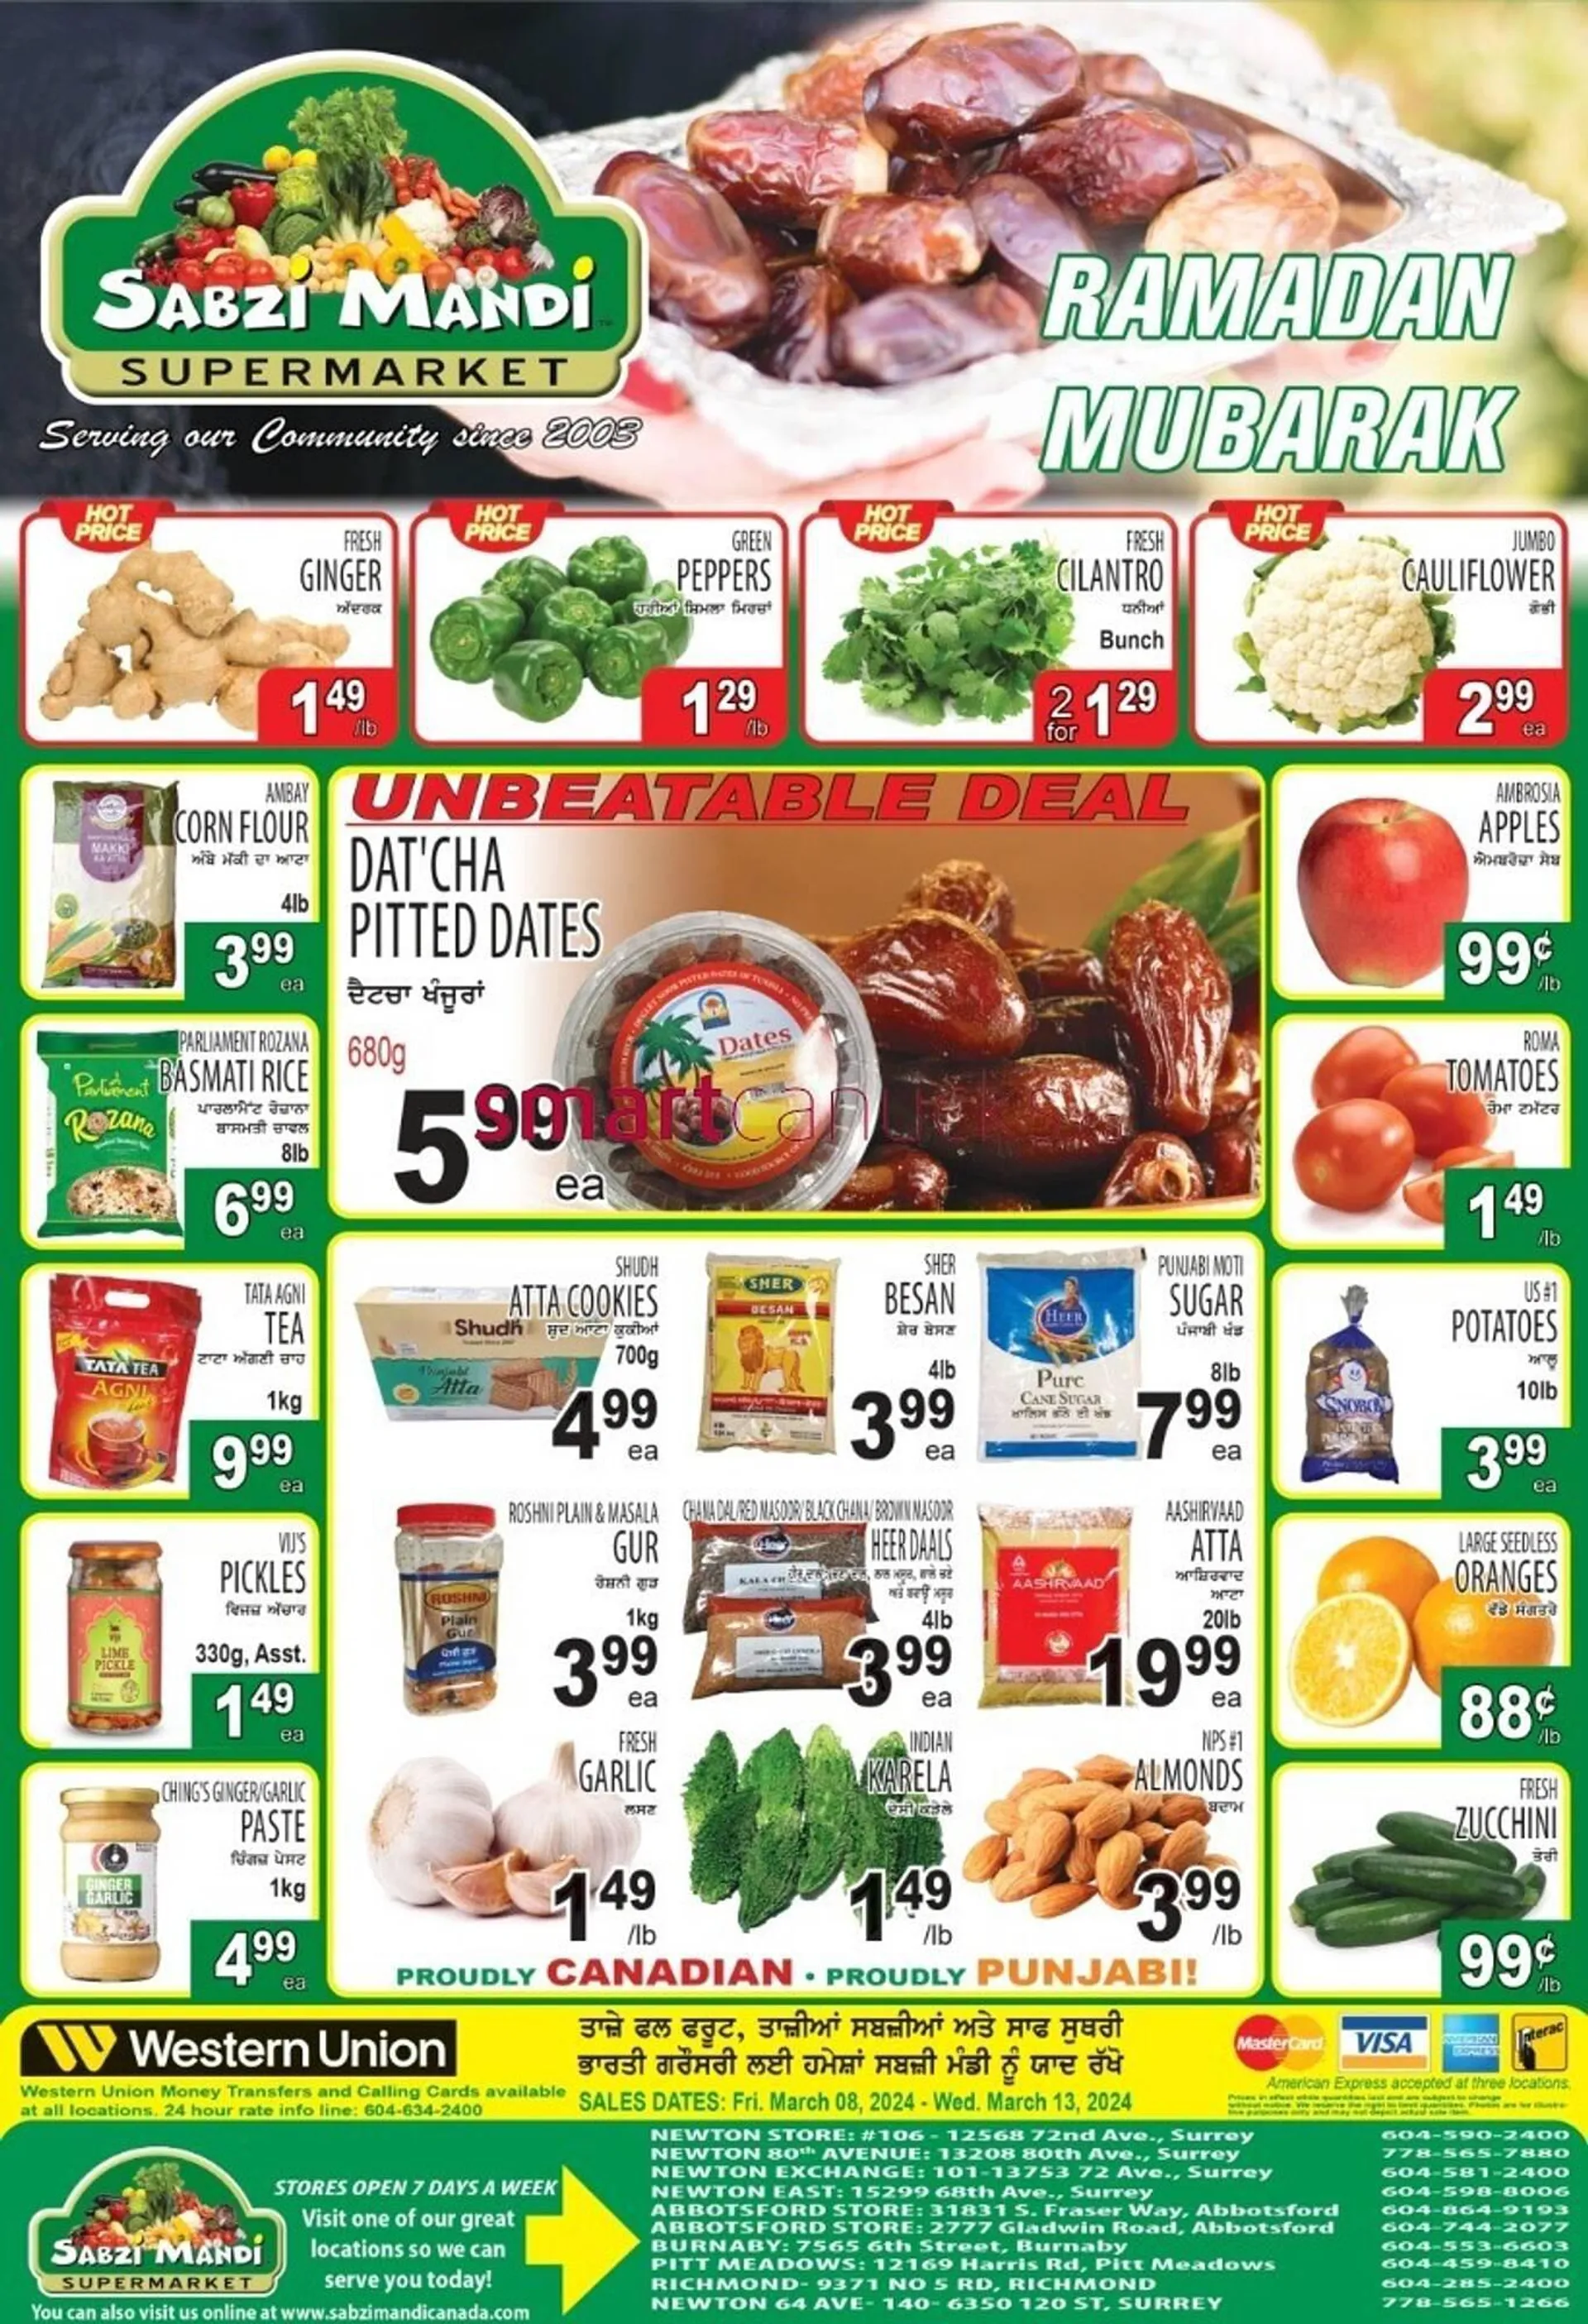 Sabzi Mandi Supermarket flyer from March 8 to March 14 2024 - flyer page 